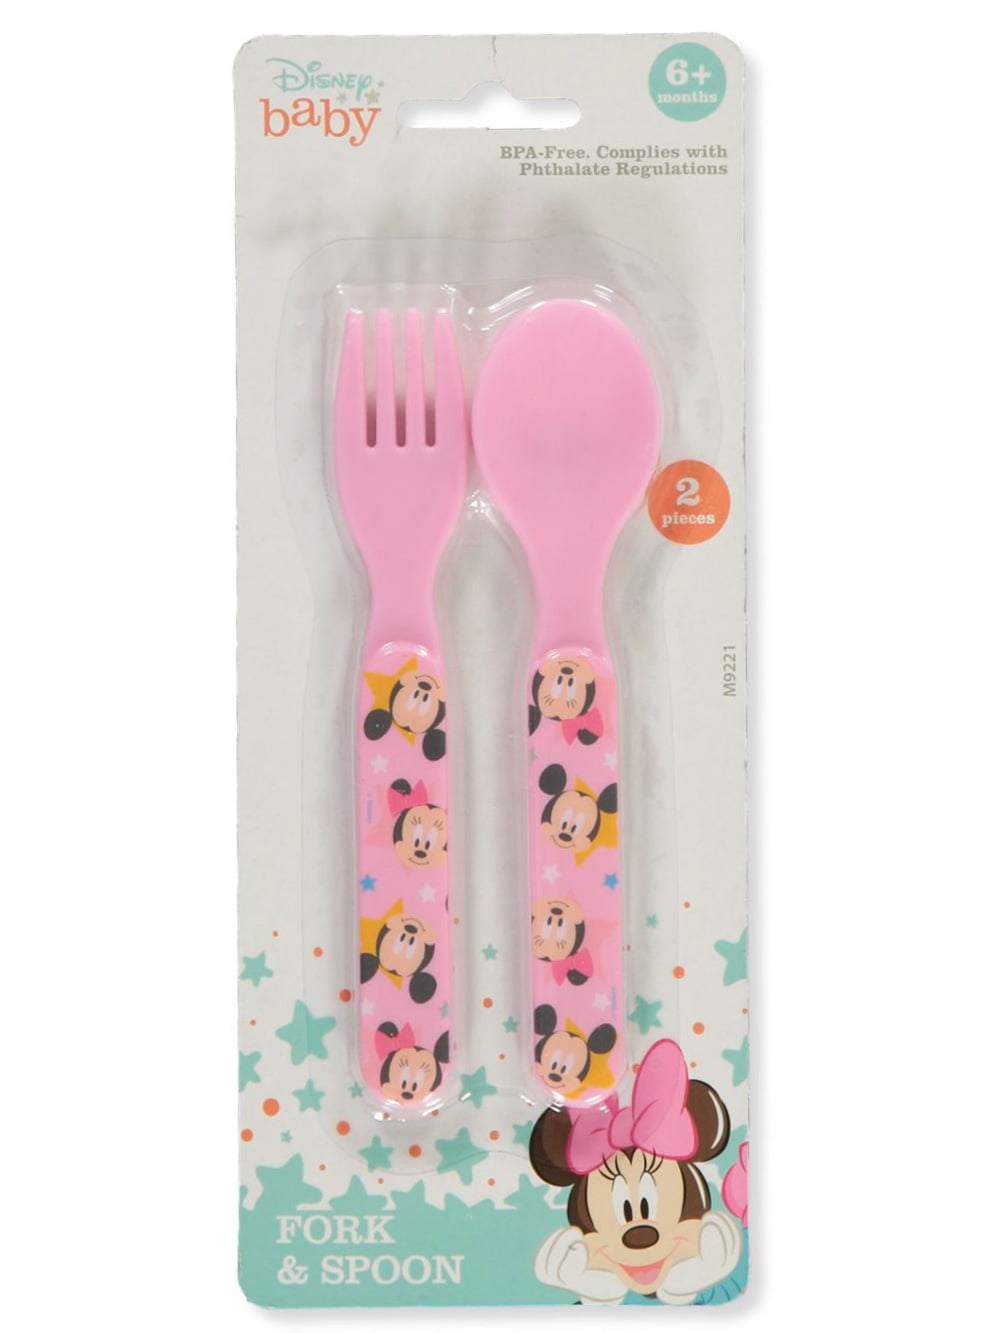 Pack of 2 Gerber Graduates Kiddy Cutlery Toddler Forks Colors may vary 3 ea 